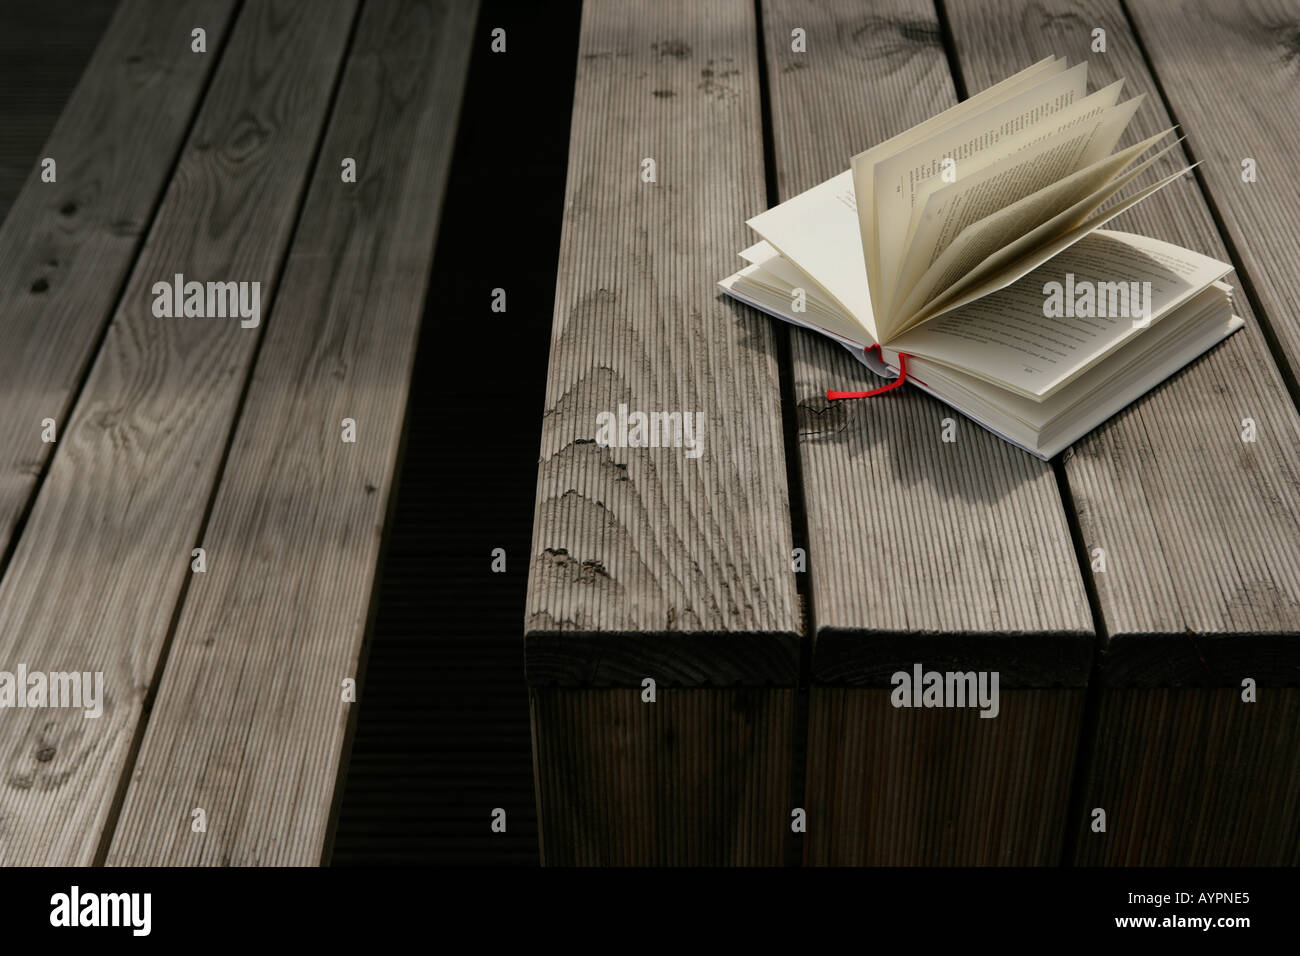 A novel placed on a wooden table with widespread pages Stock Photo